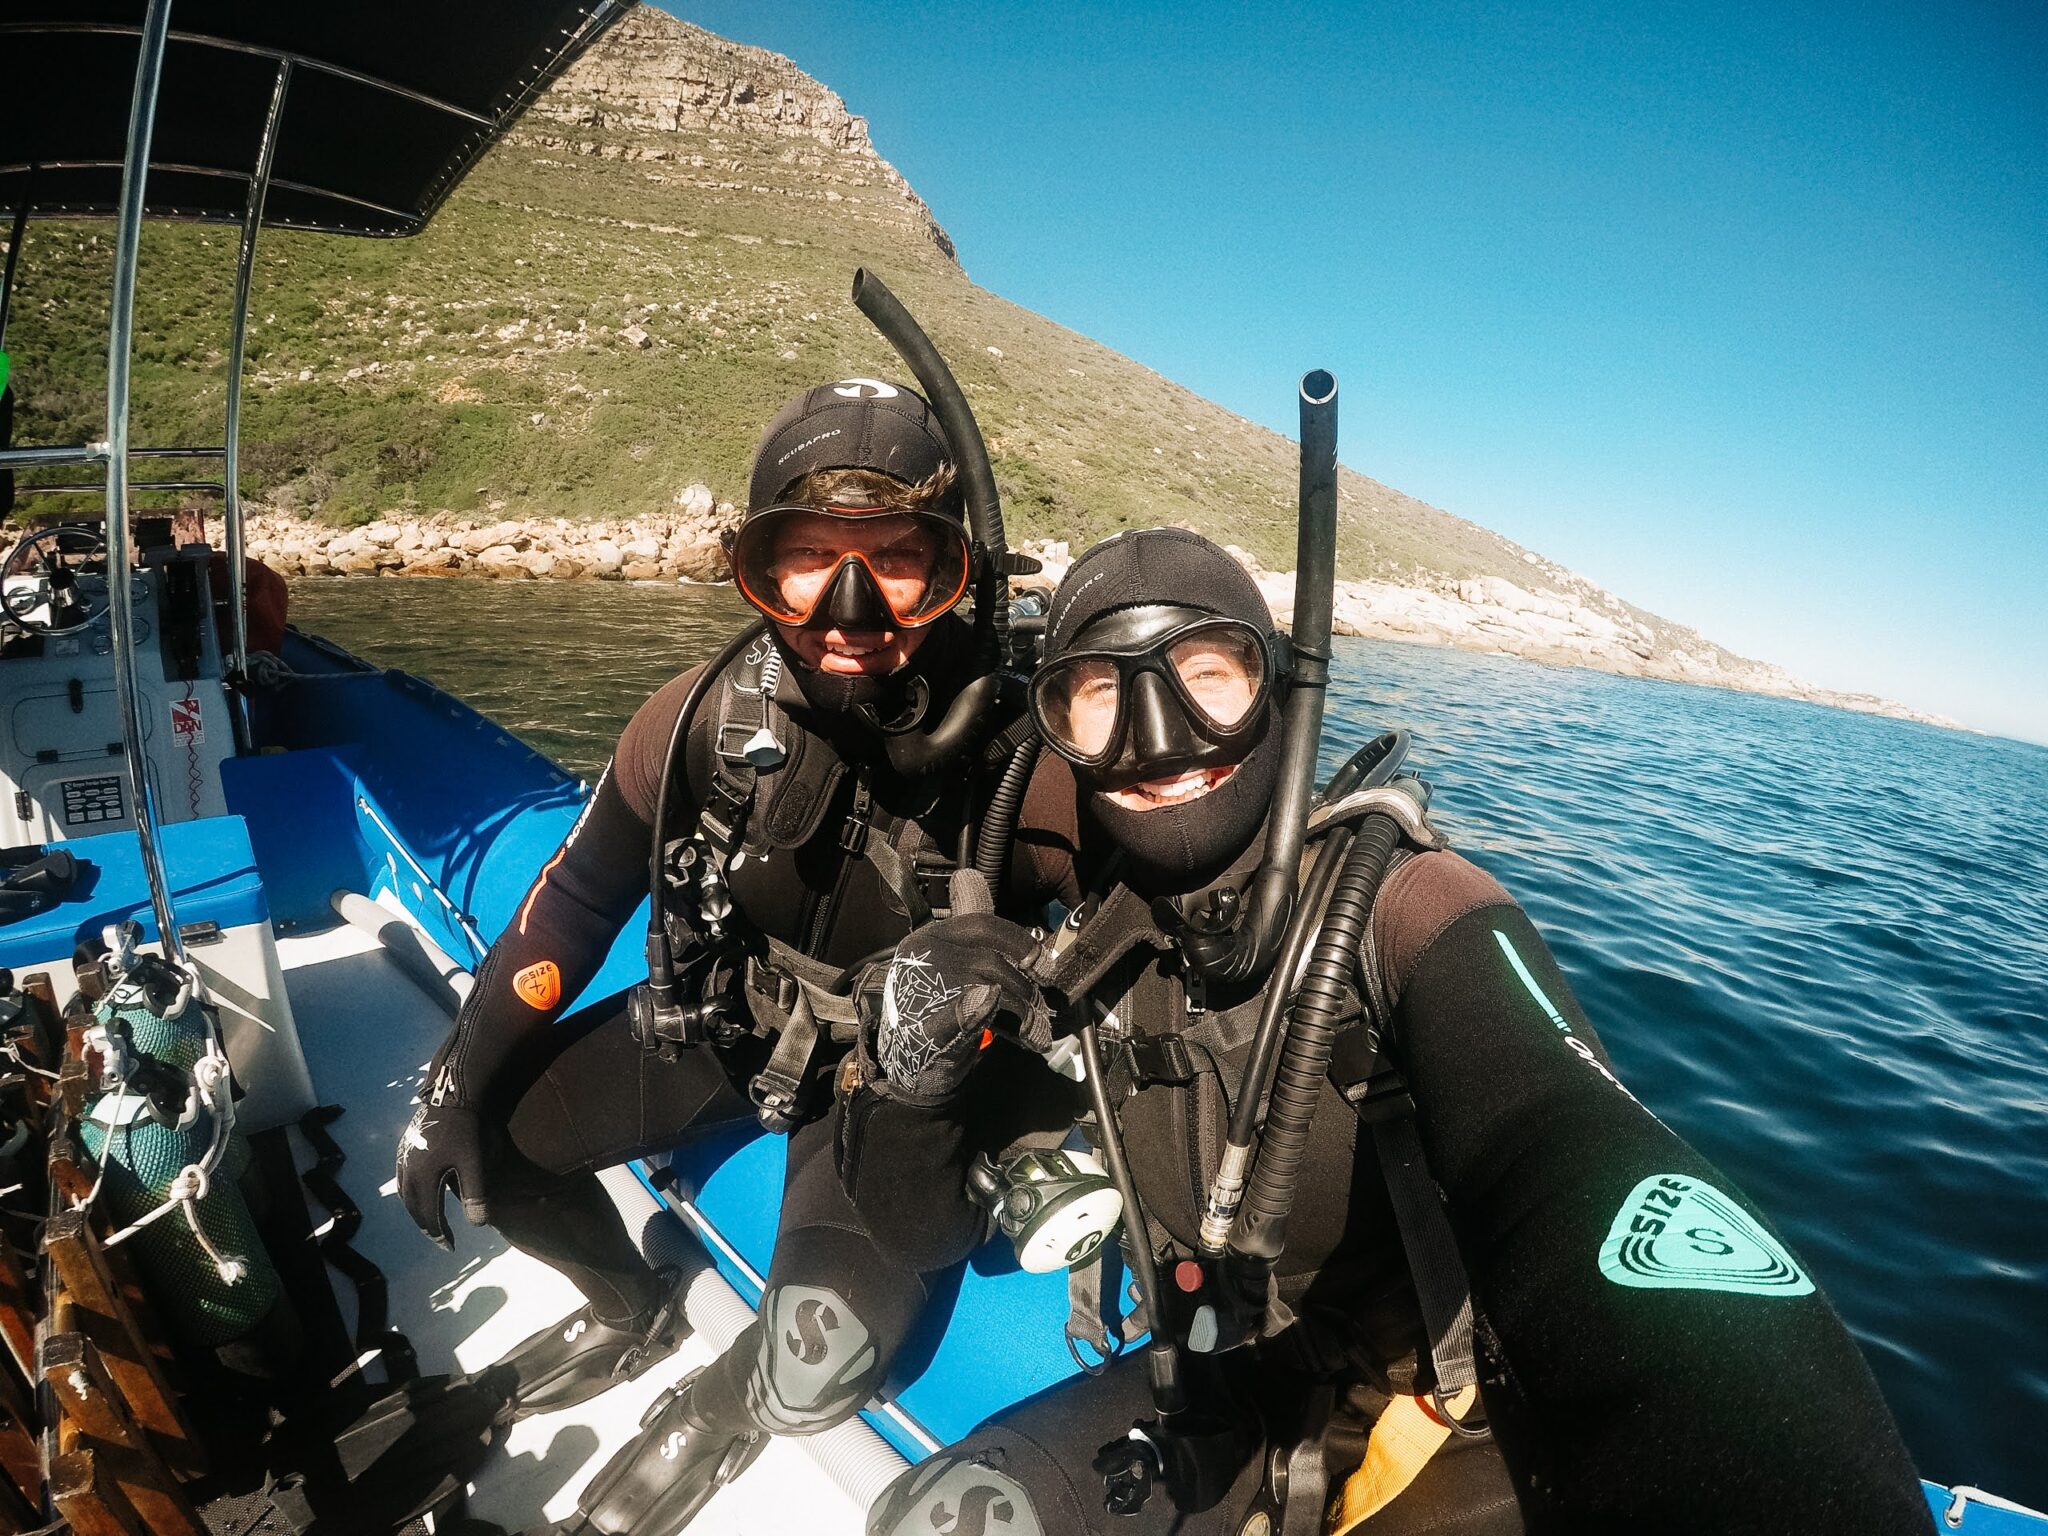 two divers sit on the side of a boat, getting ready for a scuba dive